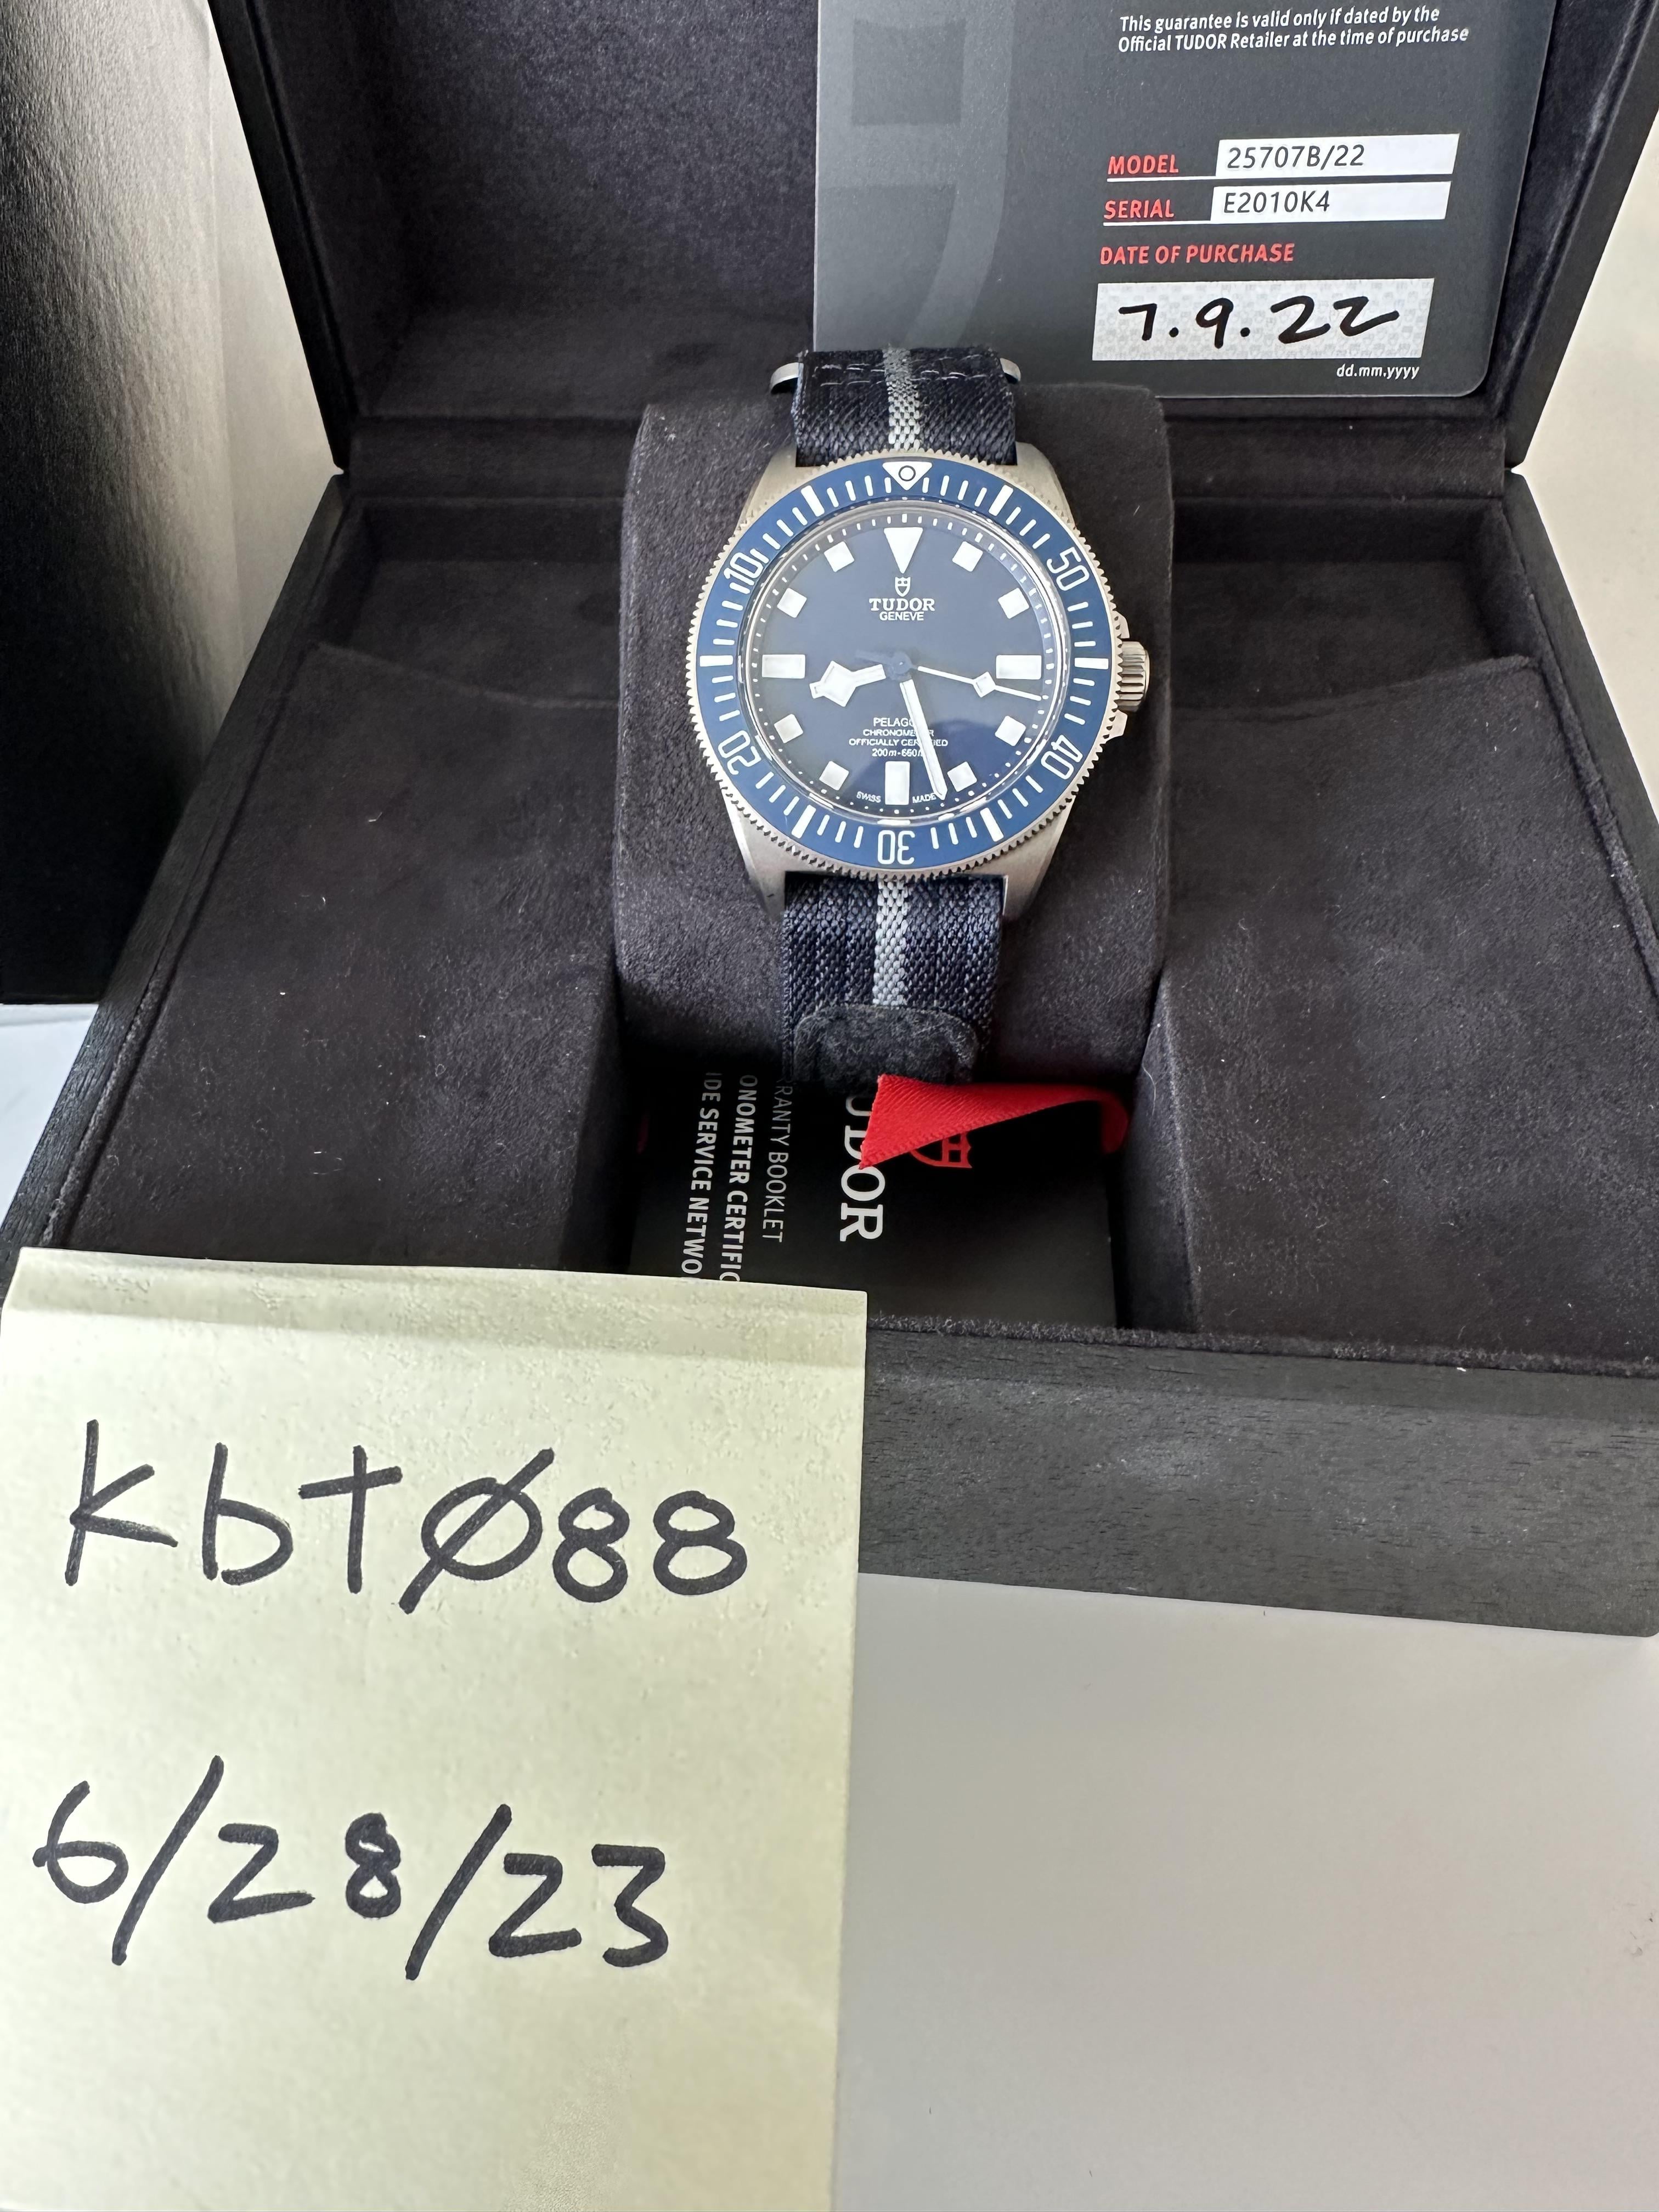 WTS] Tudor Pelagos FXD 25707B/22, Great Condition with Box + Papers